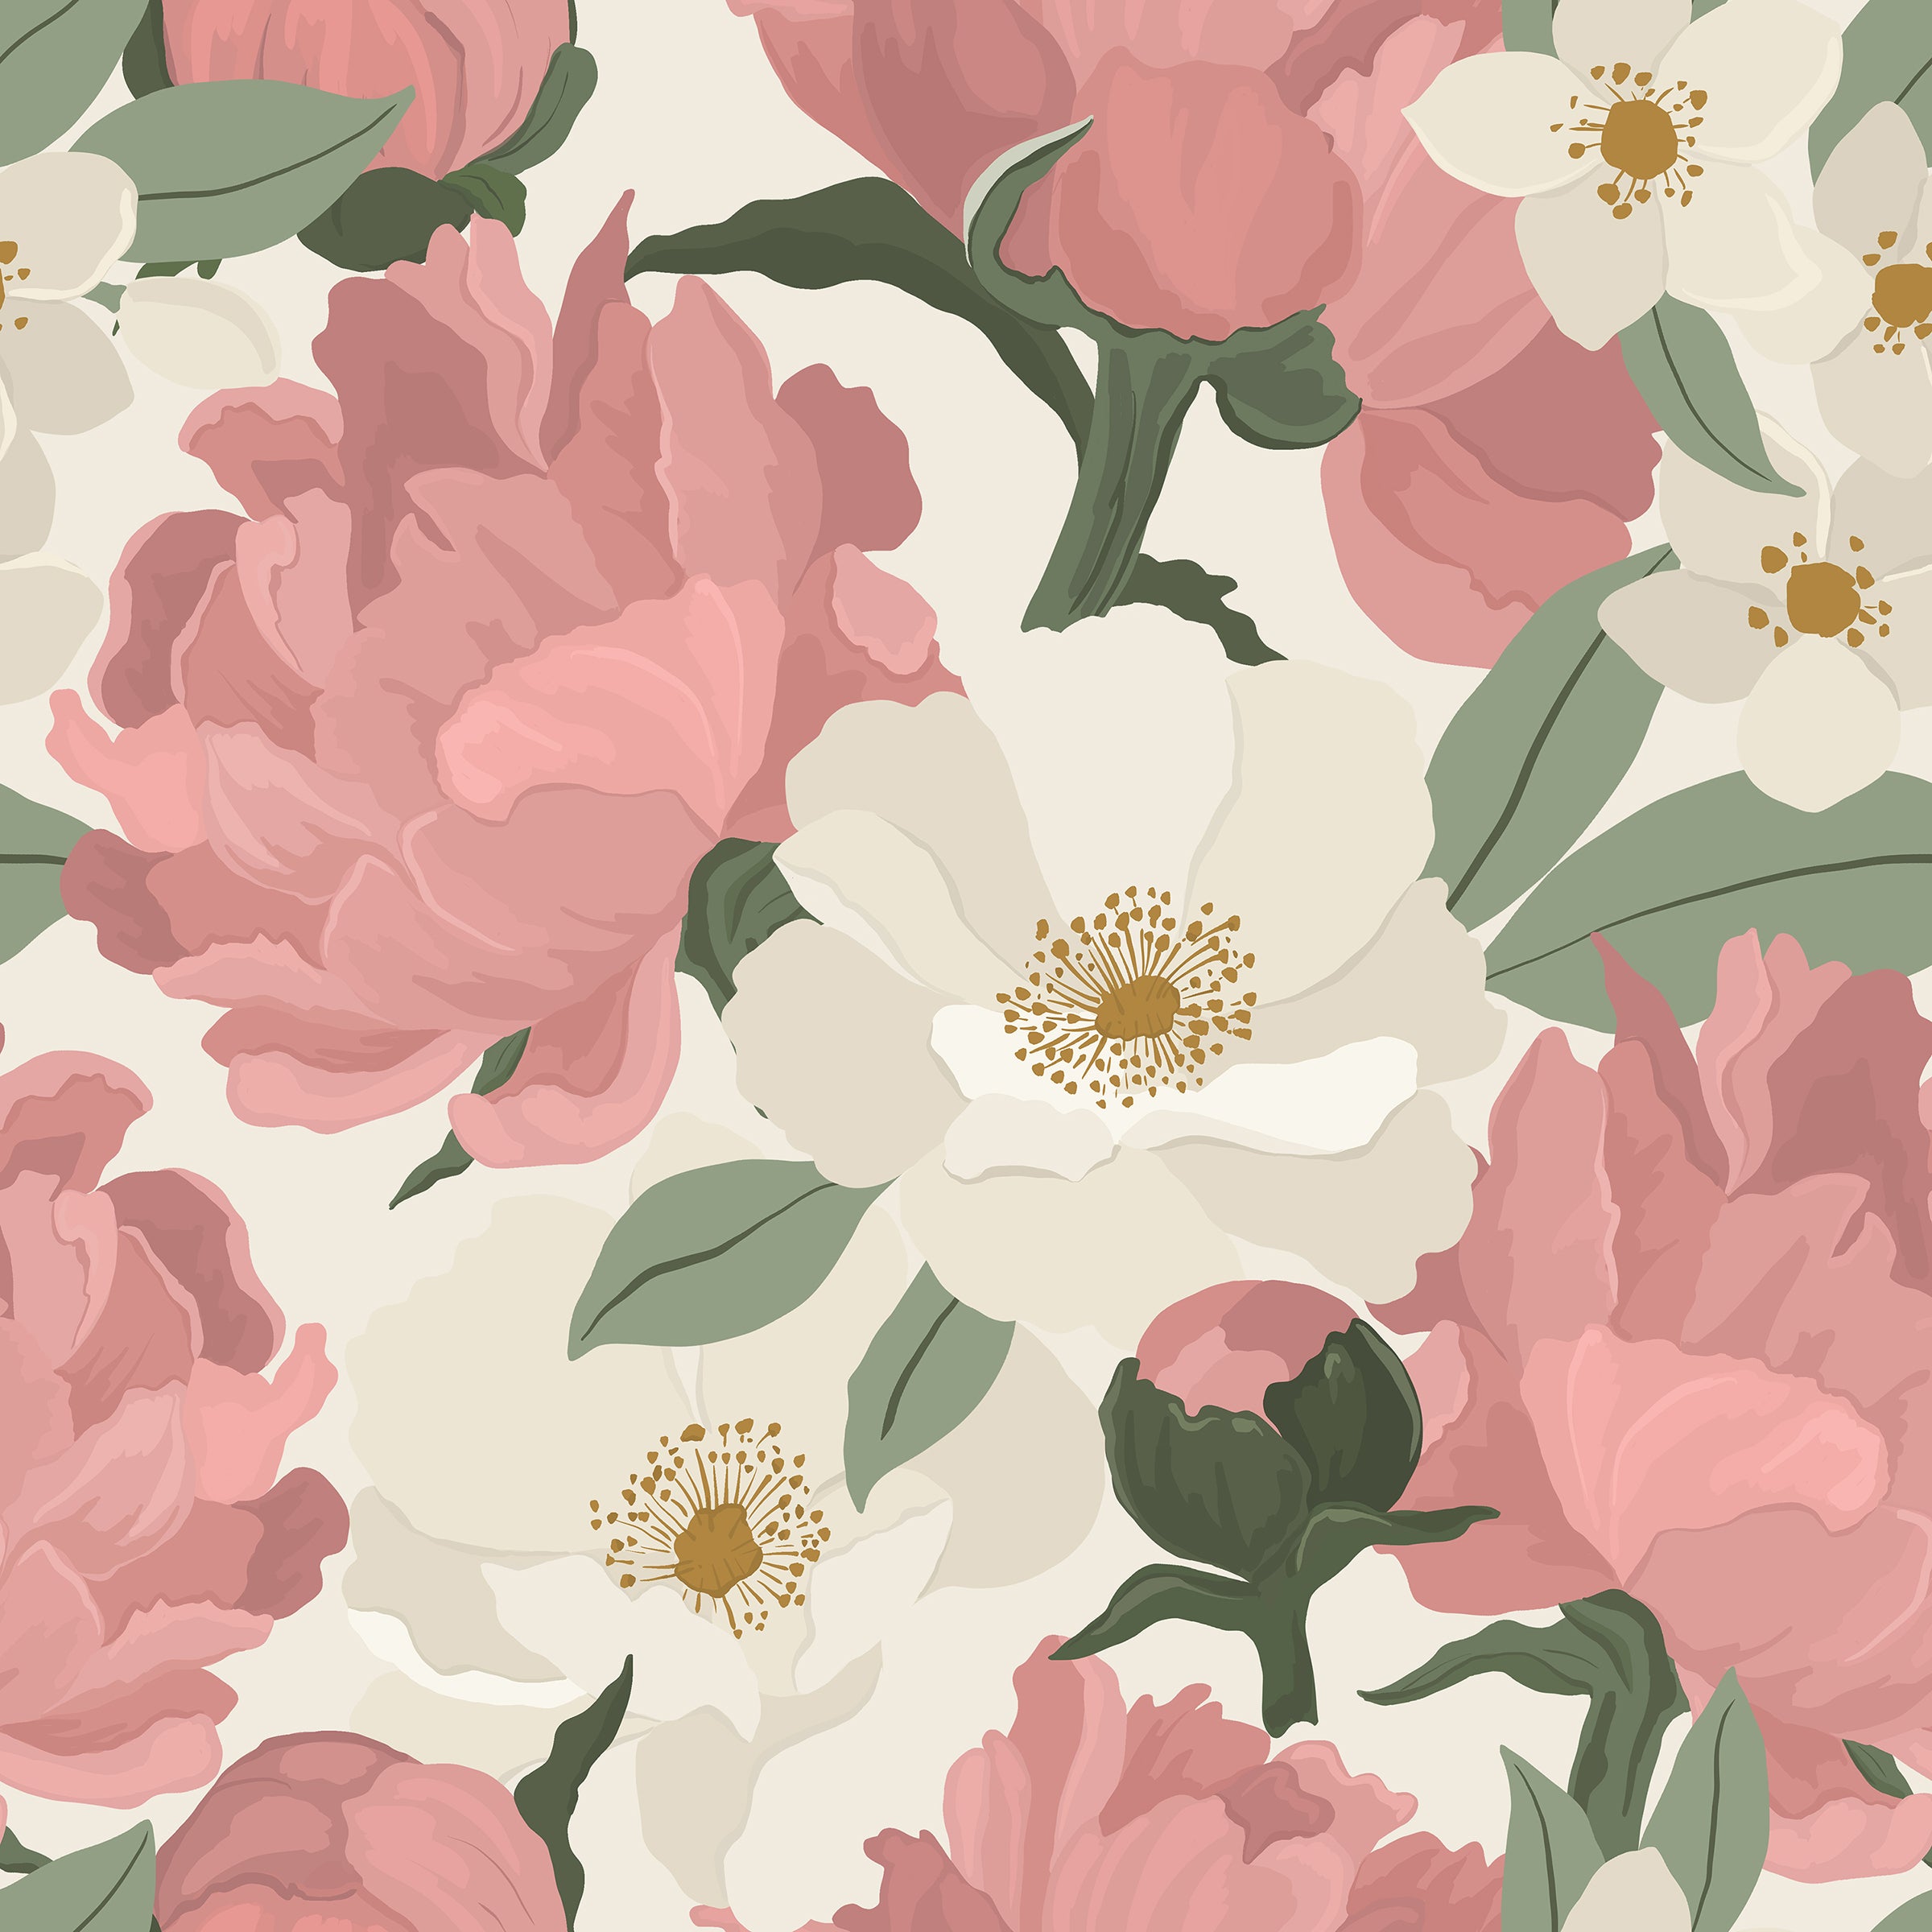 A detailed view of the Maggie Floral Wallpaper, featuring large, lush pink peonies and delicate white flowers set against a light beige background. The botanical design offers a soft, romantic aesthetic, with each bloom illustrated in vibrant colors and intricate details